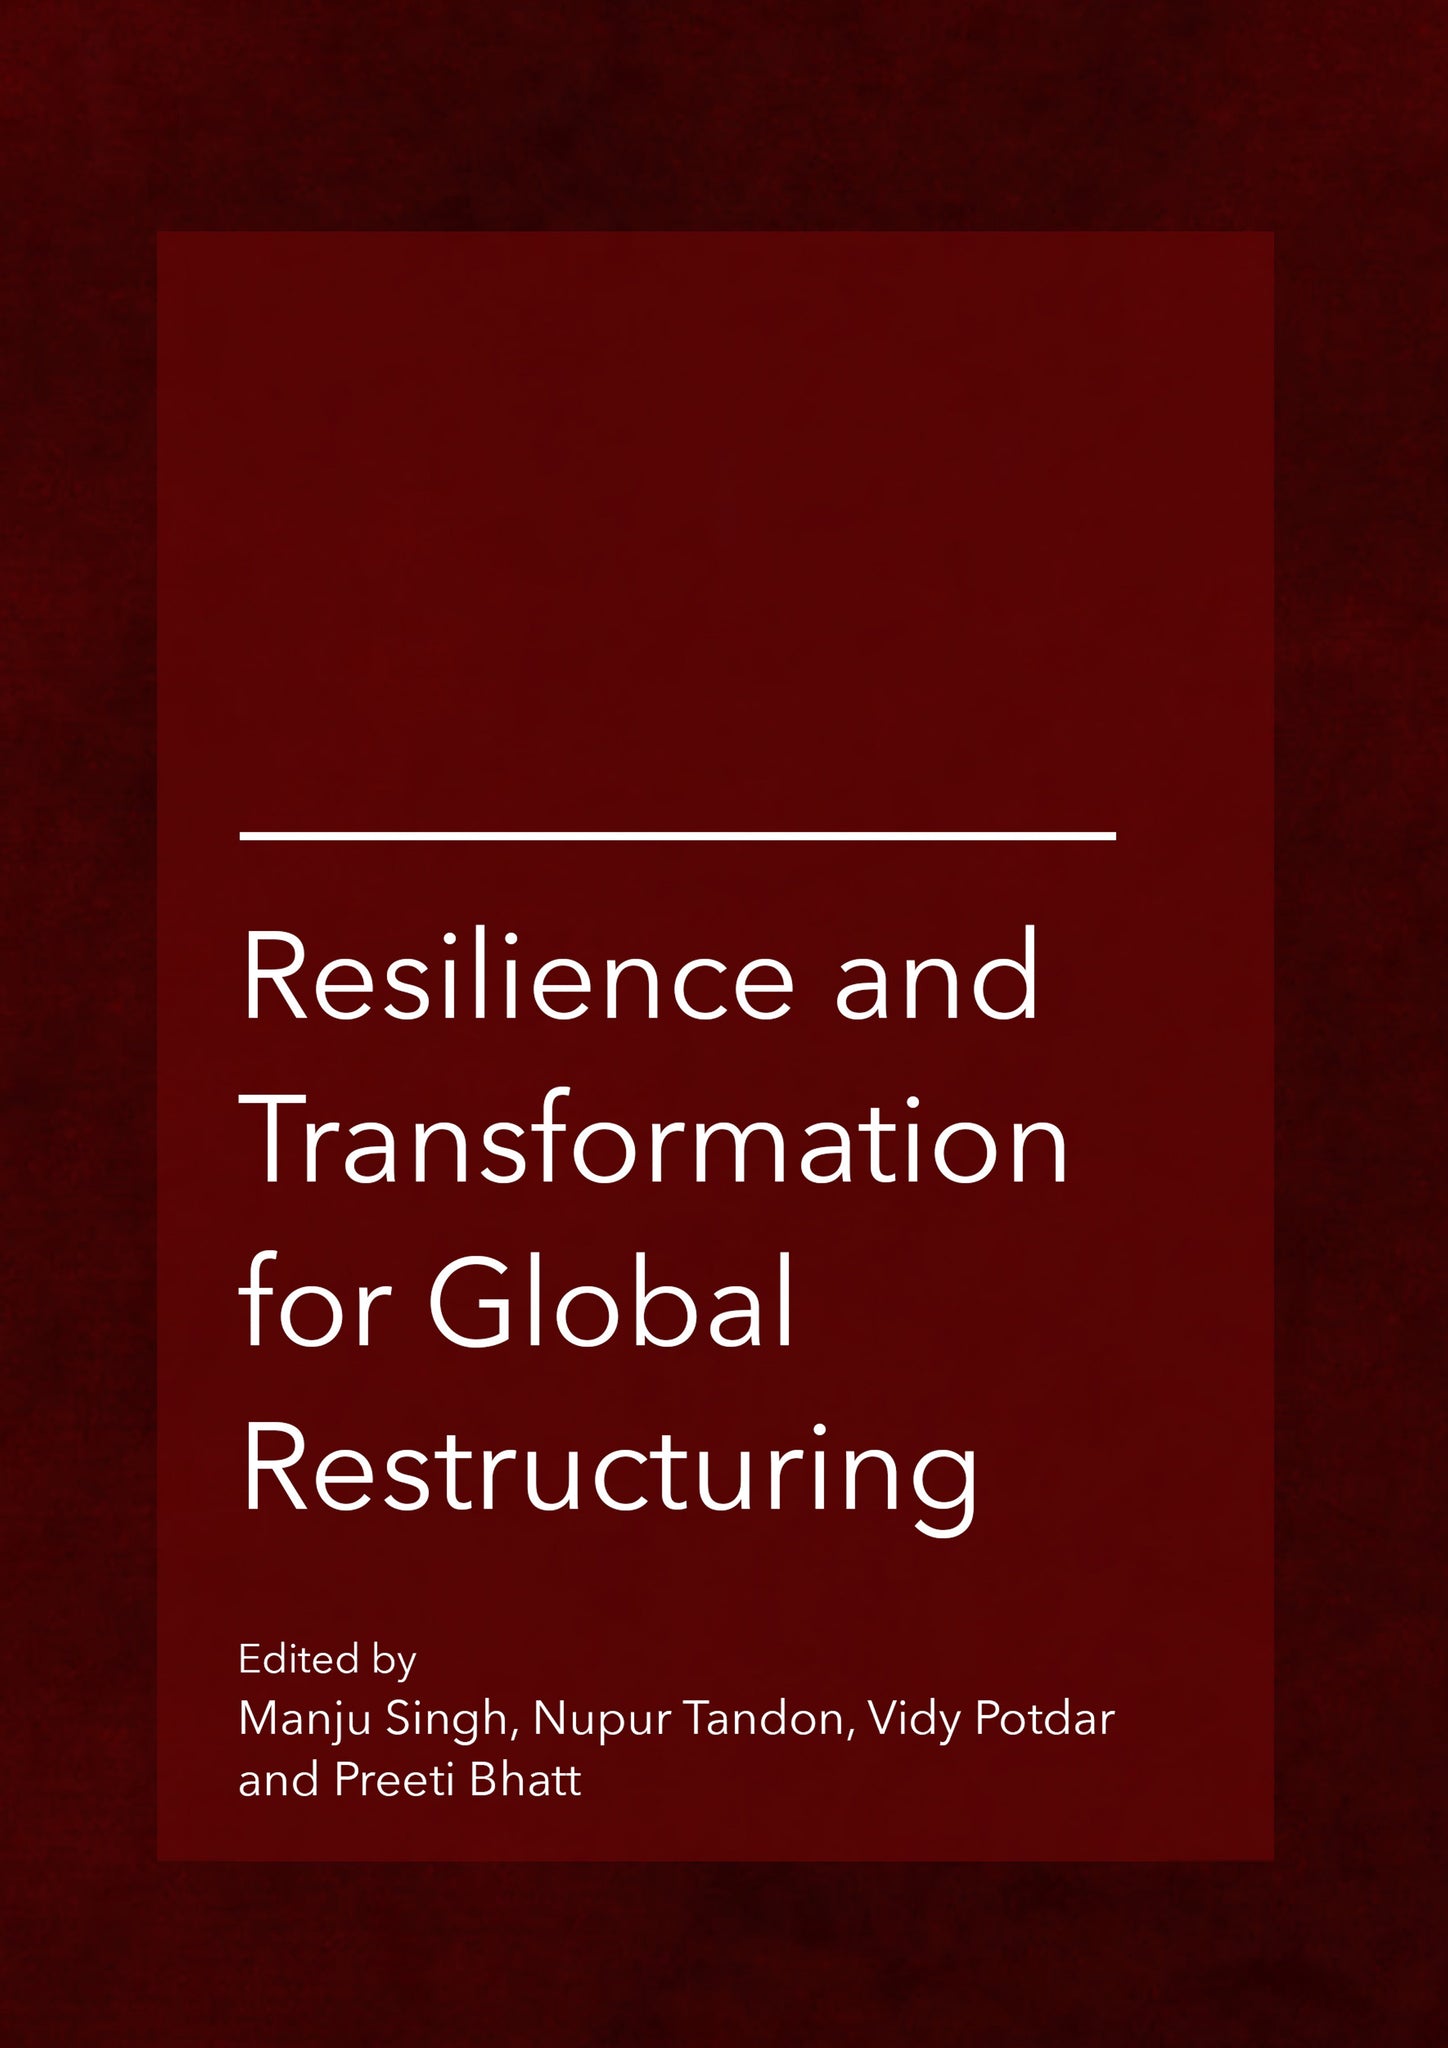 Resilience and Transformation for Global Restructuring